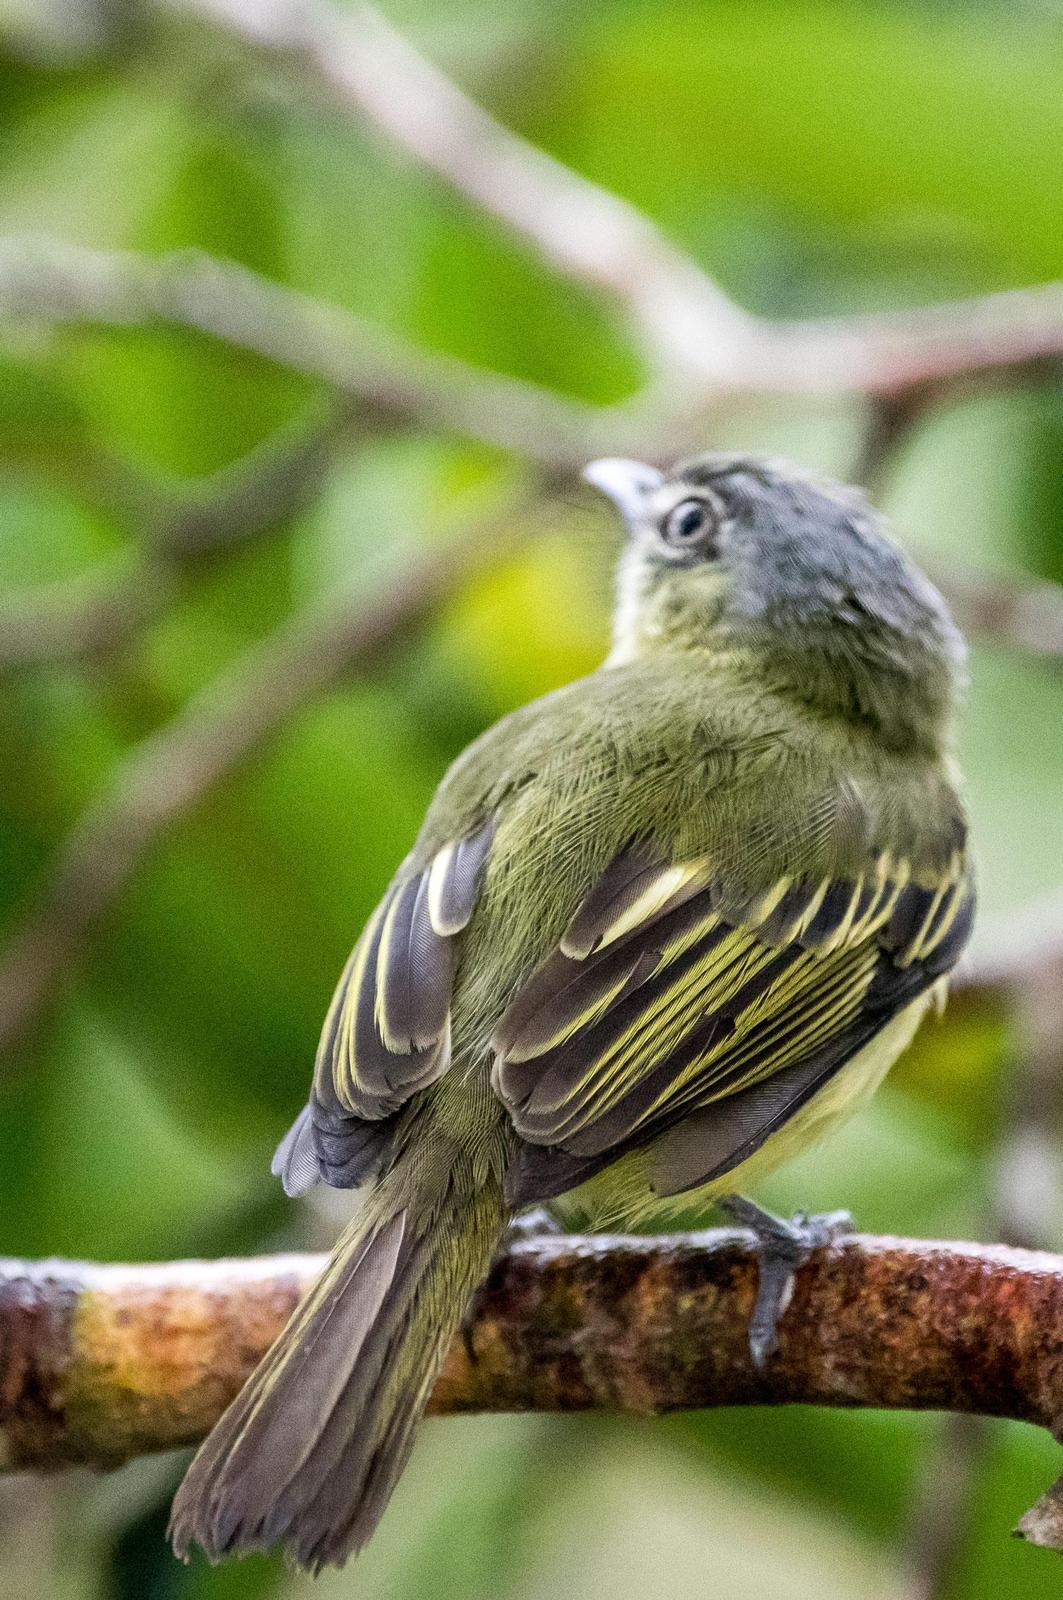 Slender-footed Tyrannulet Photo by Phil Kahler